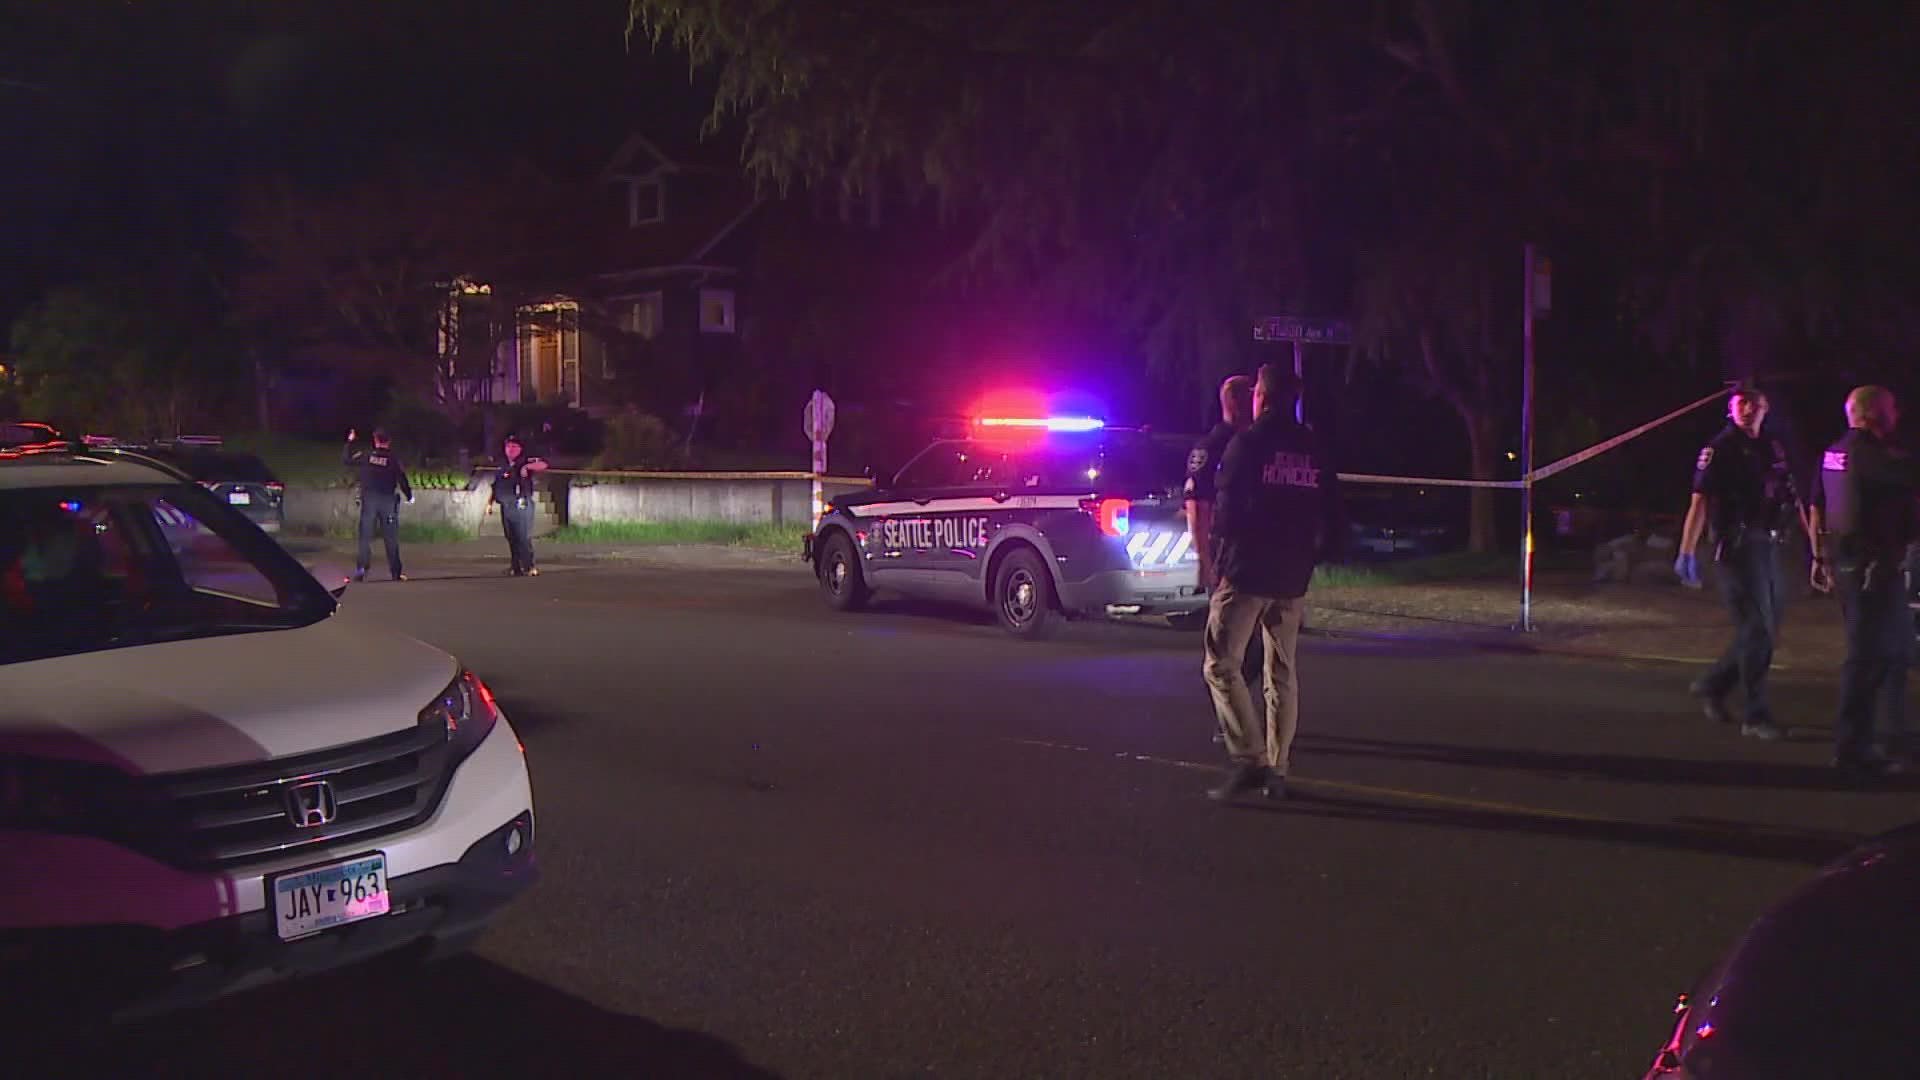 Two people were shot and killed in Seattle’s Wallingford neighborhood early Tuesday morning. No suspect information has been released at this time.